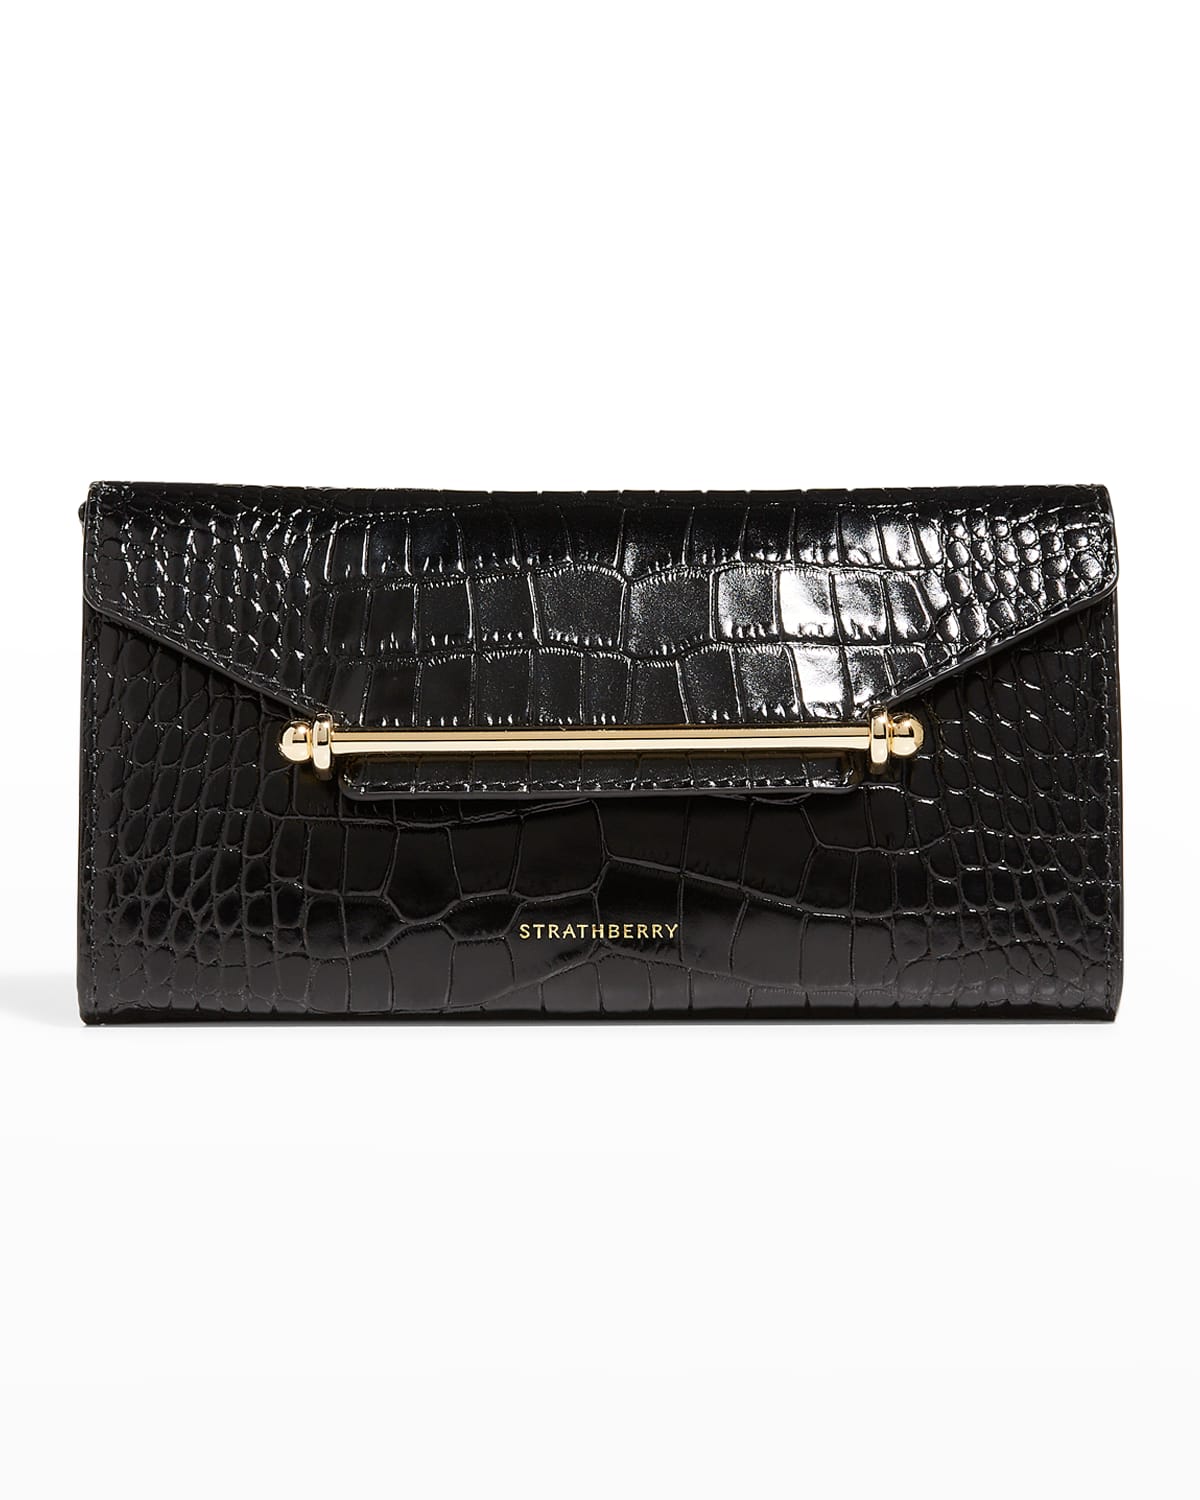 Strathberry Multrees Cro-embossed Flap Wallet On Chain In Black